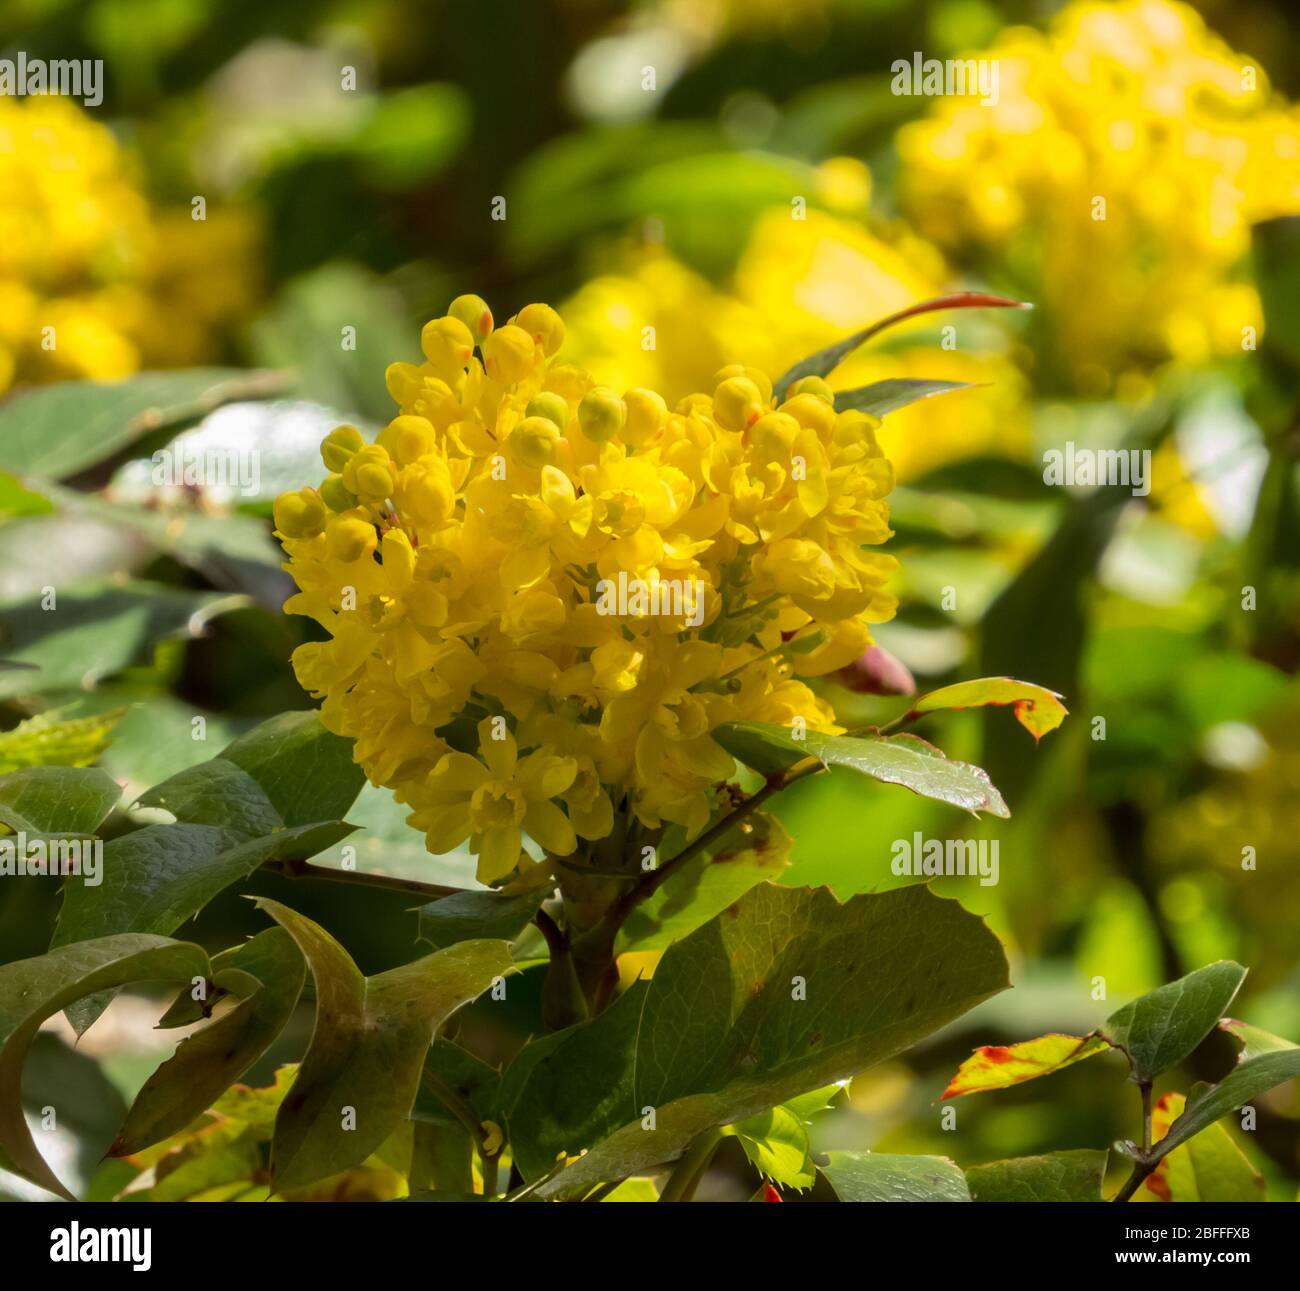 Oregon grape spring bloom. Yellow flowers and green leaves. Stock Photo